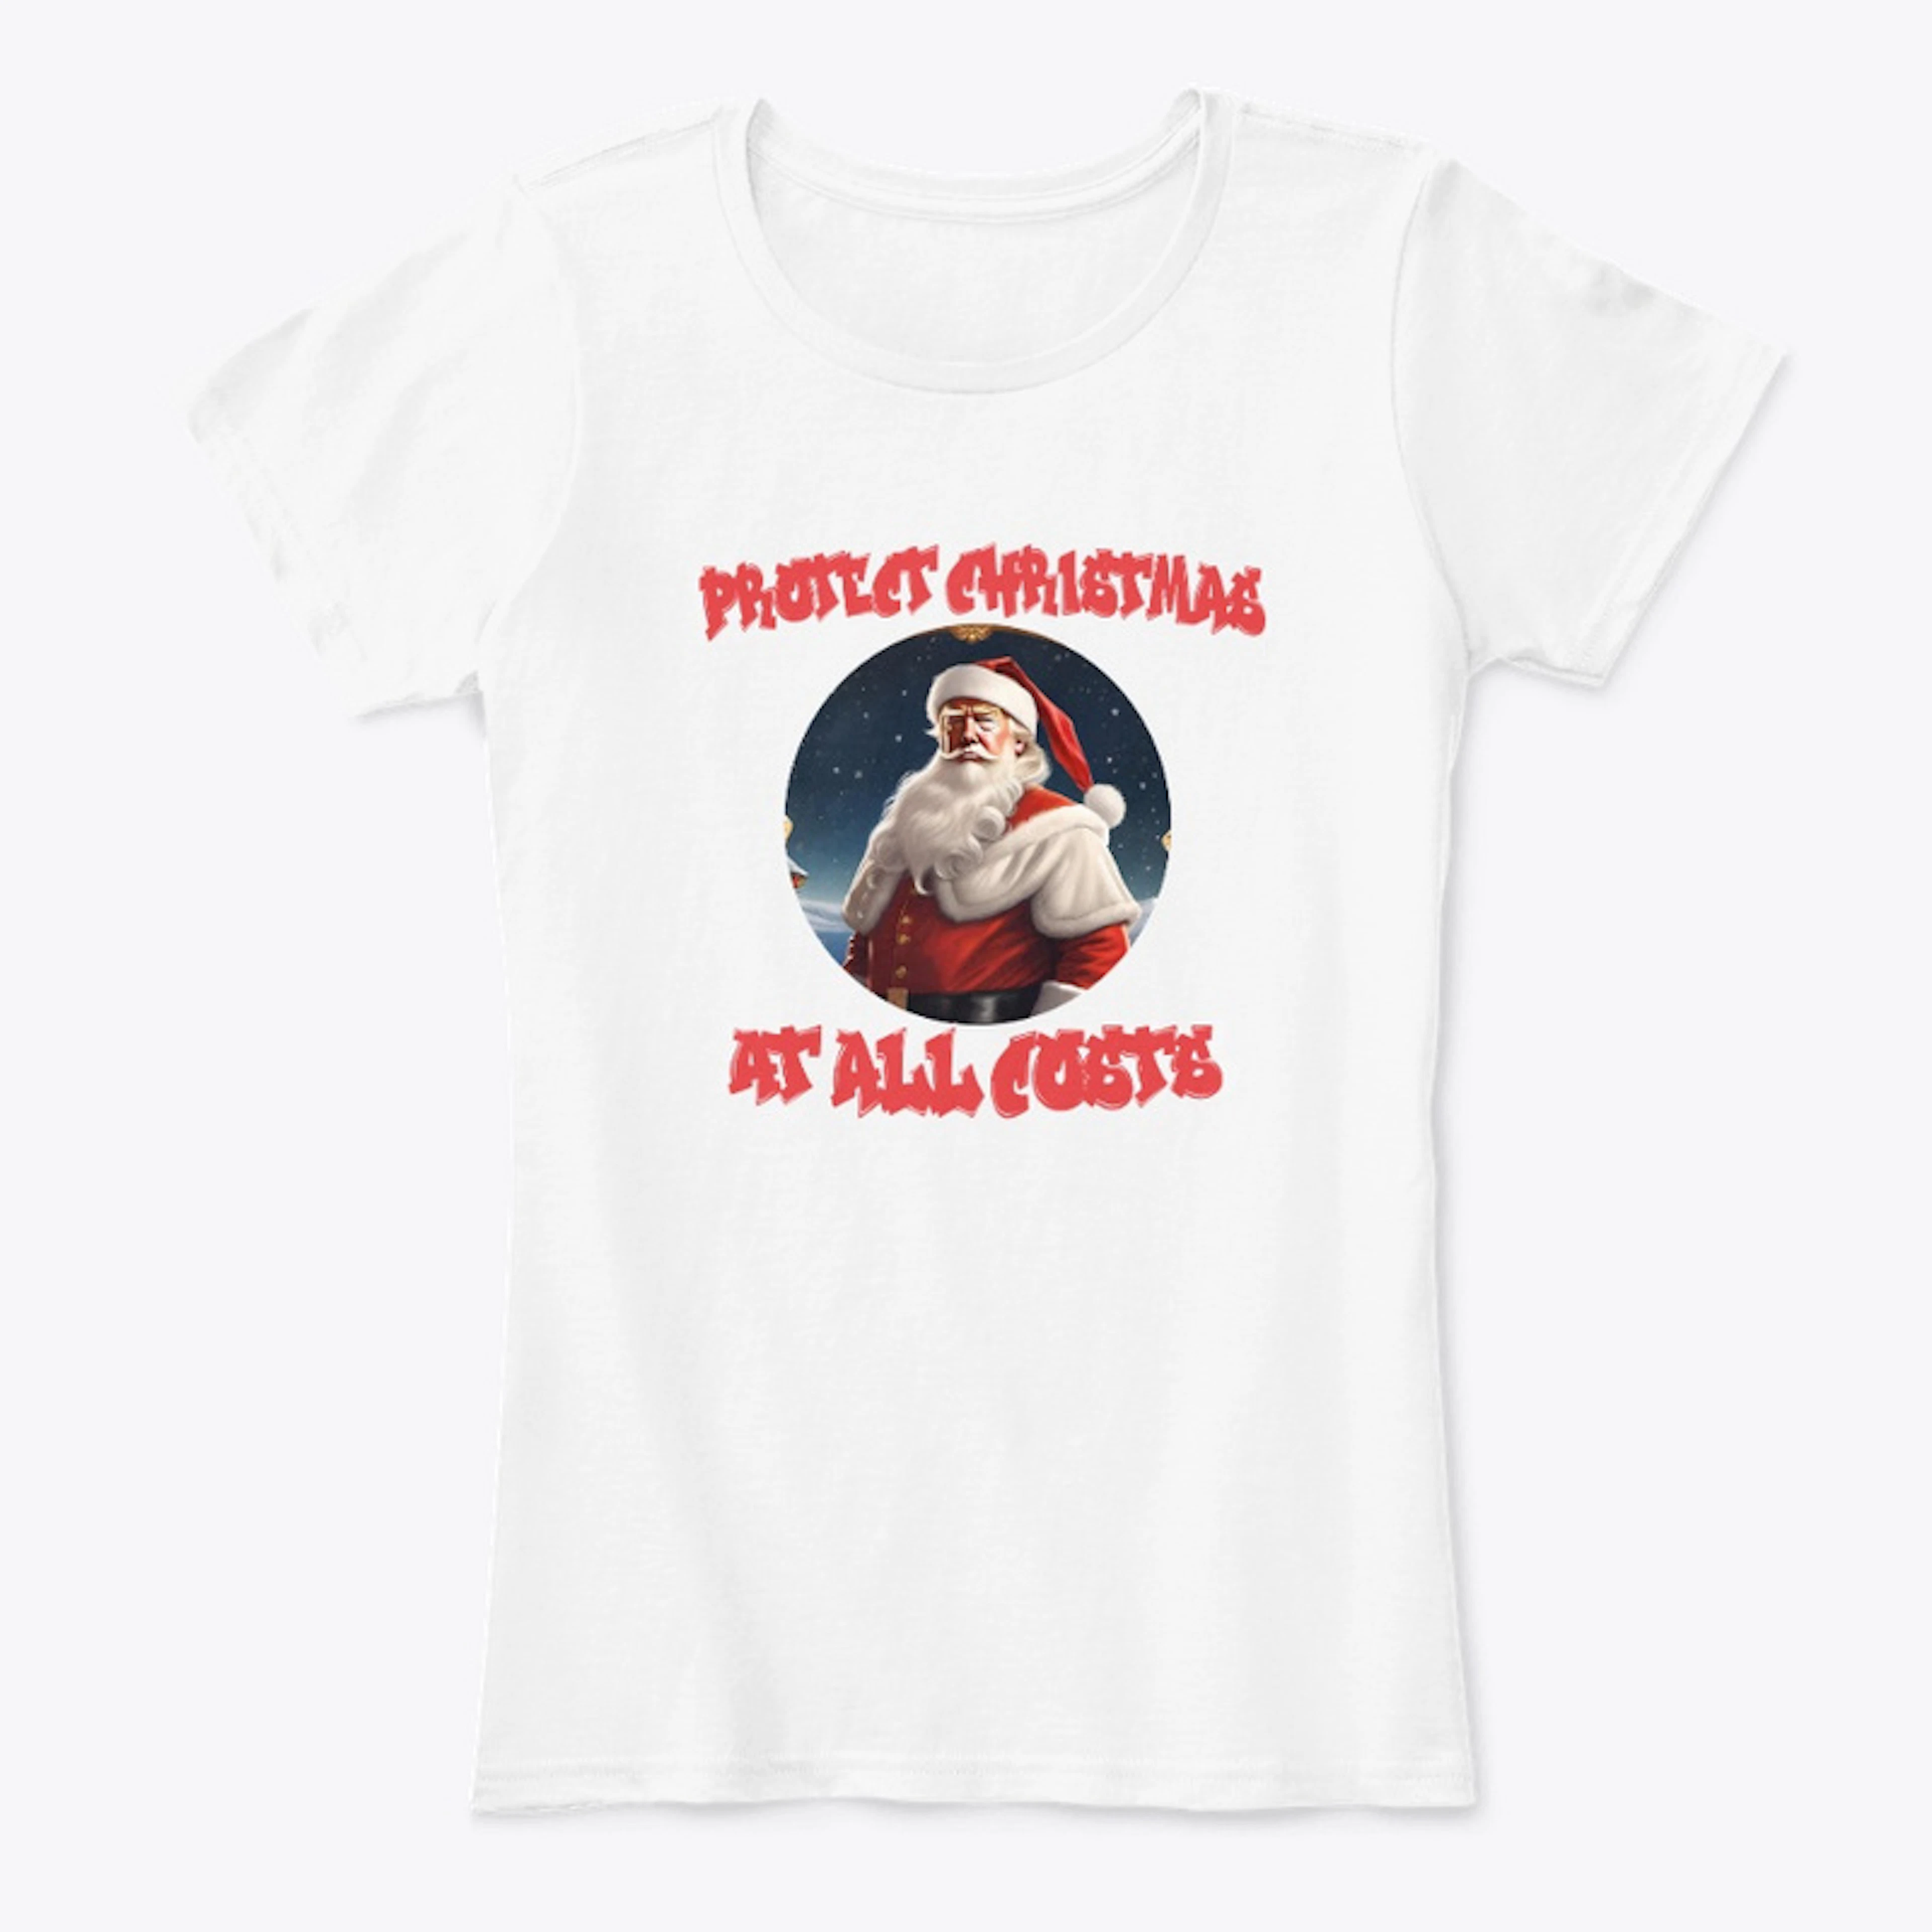 Protect Christmas - DT1 Collection